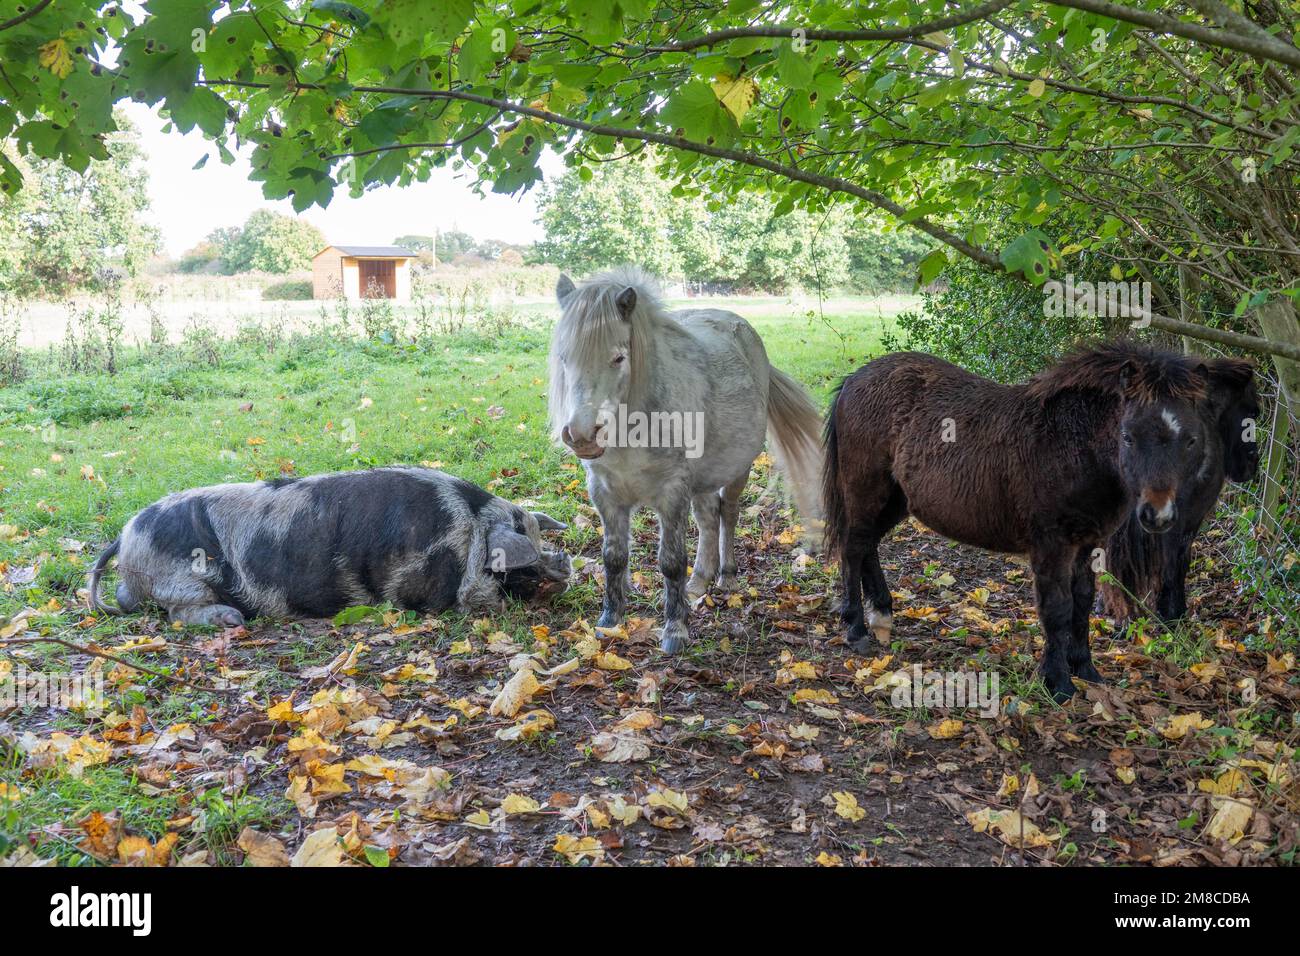 large pig with black spots lying next to small brown and white ponies Stock Photo